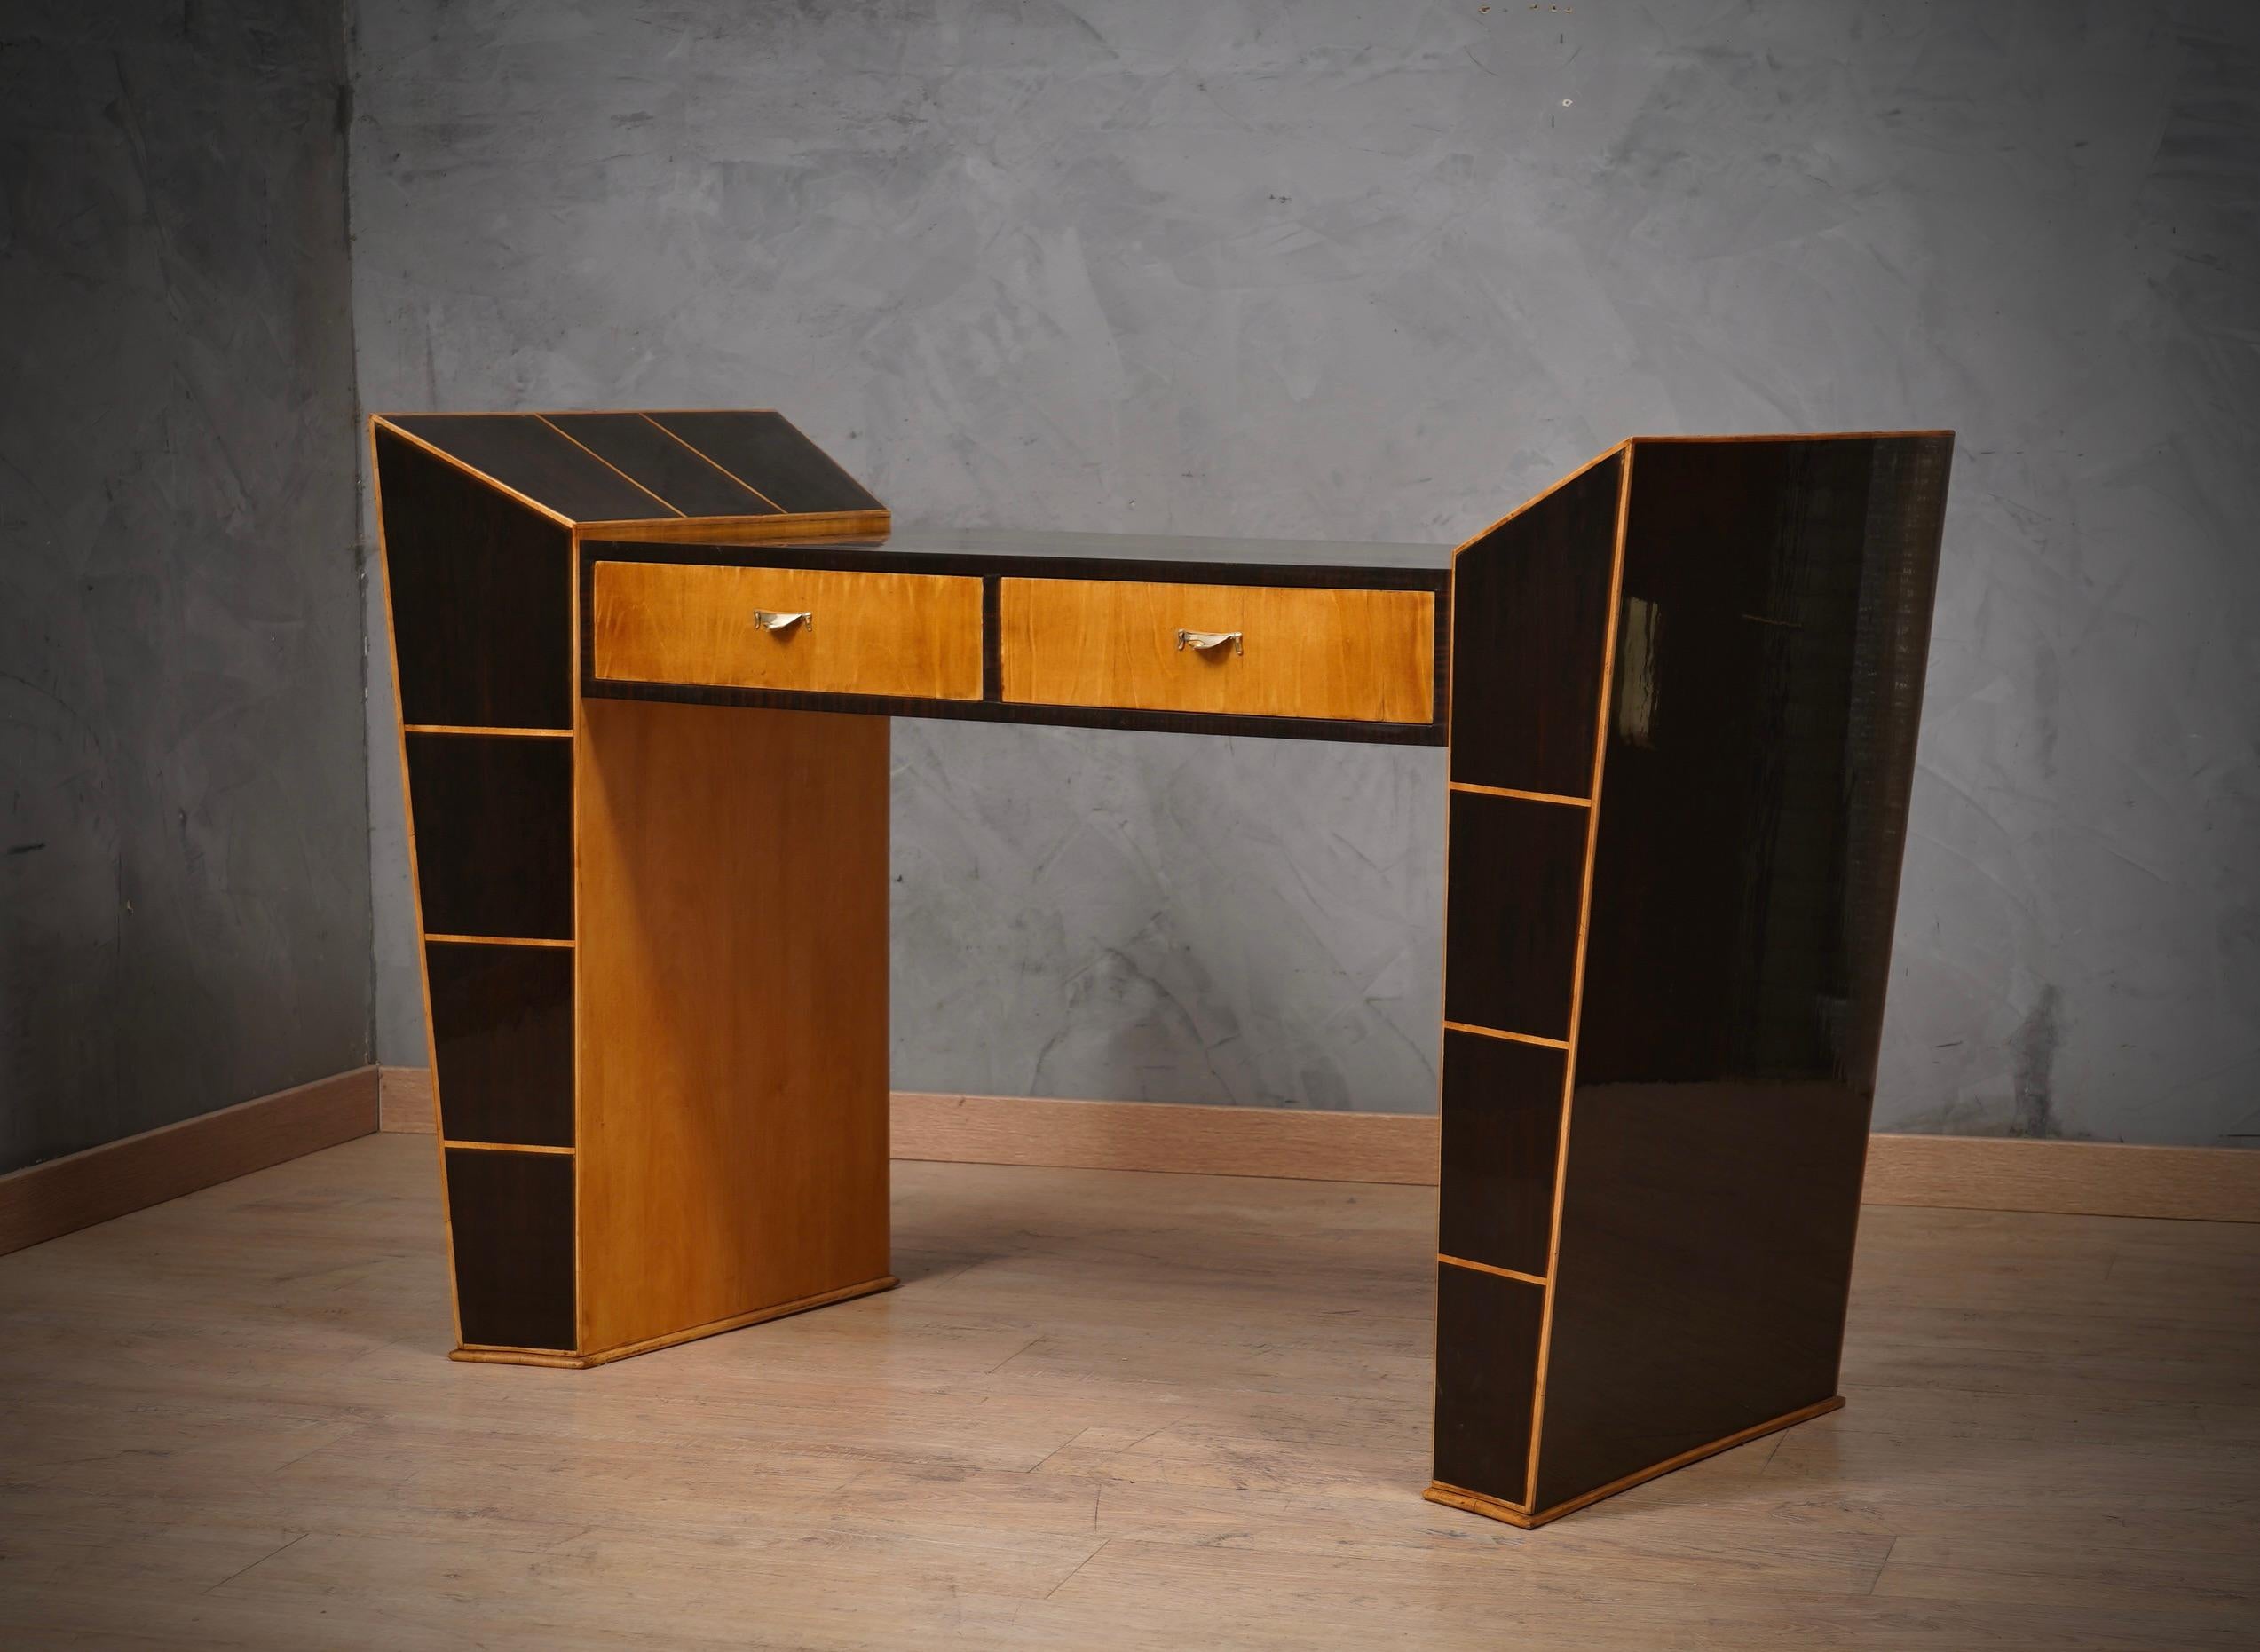 Beautiful desk in characteristic Italian style of Paolo Buffa, Vittorio Dassi and Osvaldo Borsani. Very particular design. Right size will perfectly fill a corner of your home.

Veneer in walnut wood and maple wood. Top and external part all in